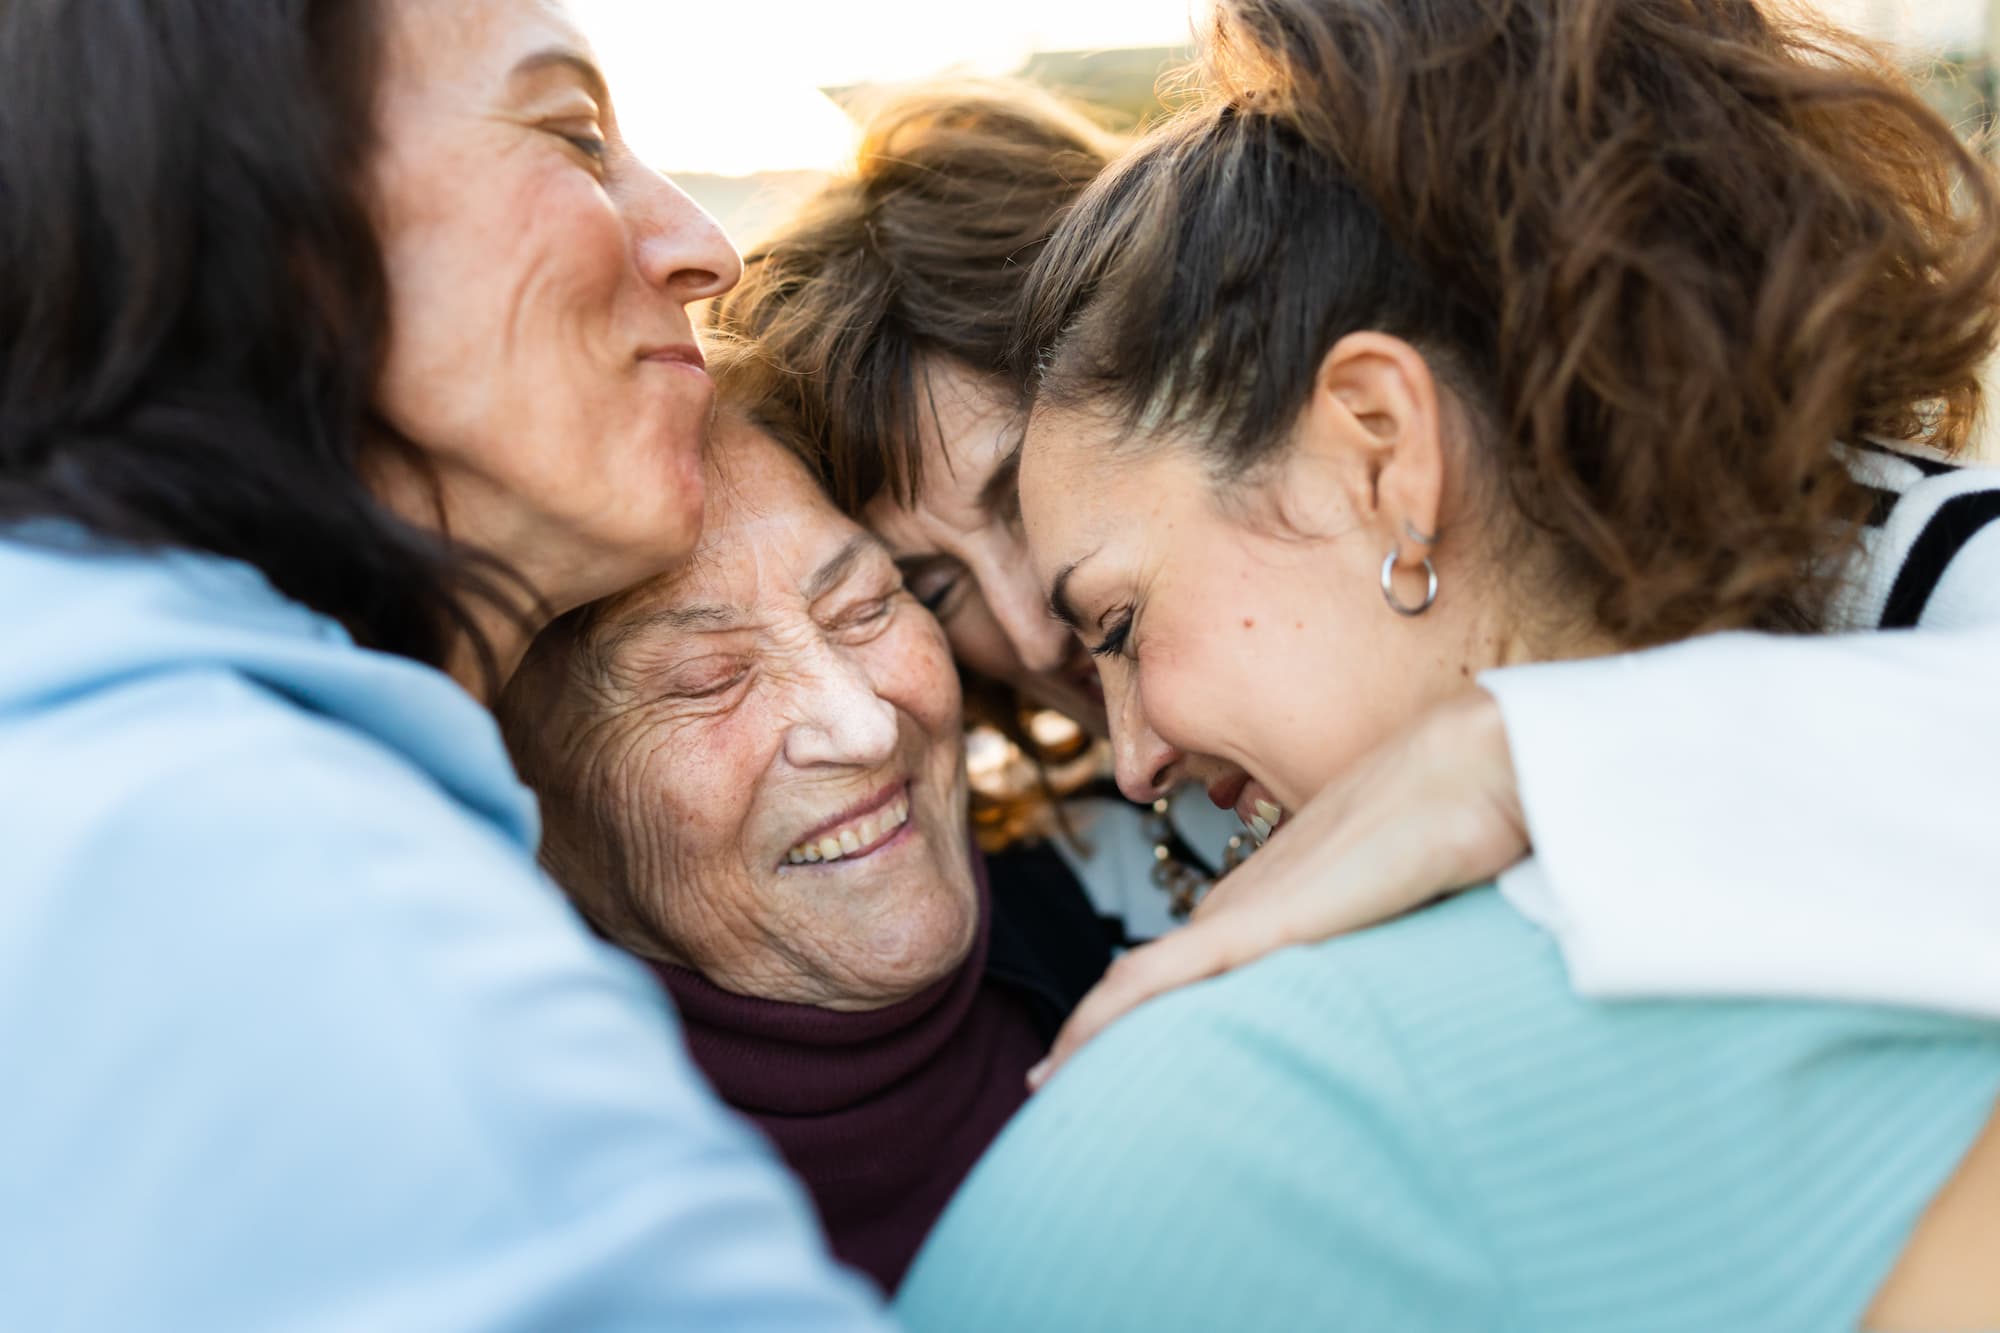 group of women hugging each other, in the center is the grandmother laughing as she receives the love of her family.